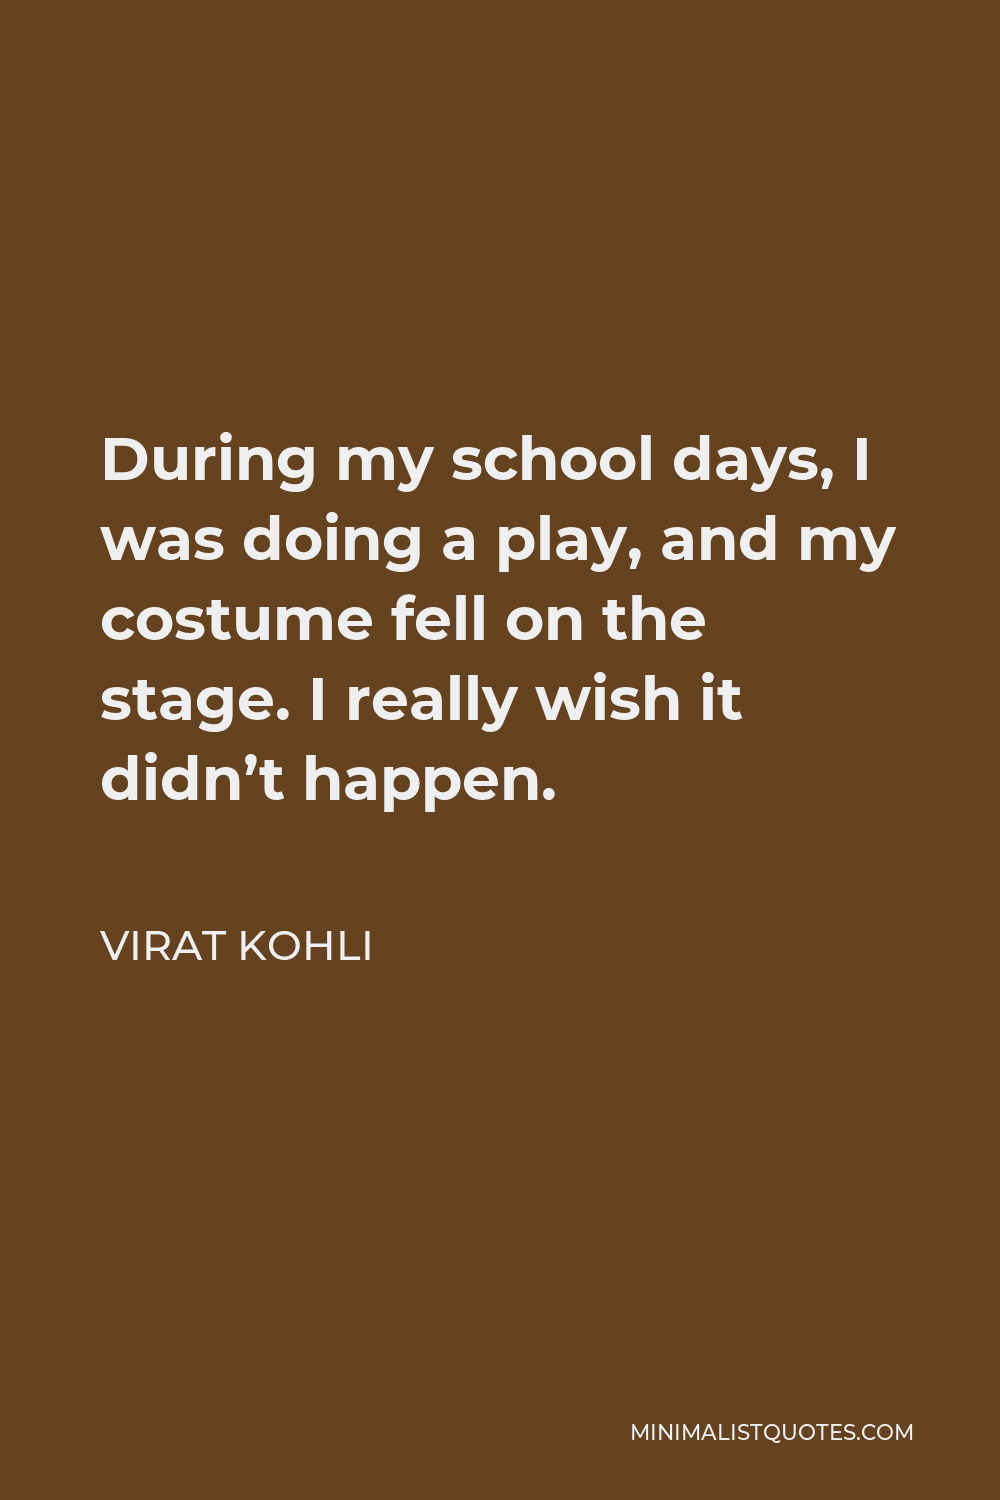 Virat Kohli Quote - During my school days, I was doing a play, and my costume fell on the stage. I really wish it didn’t happen.